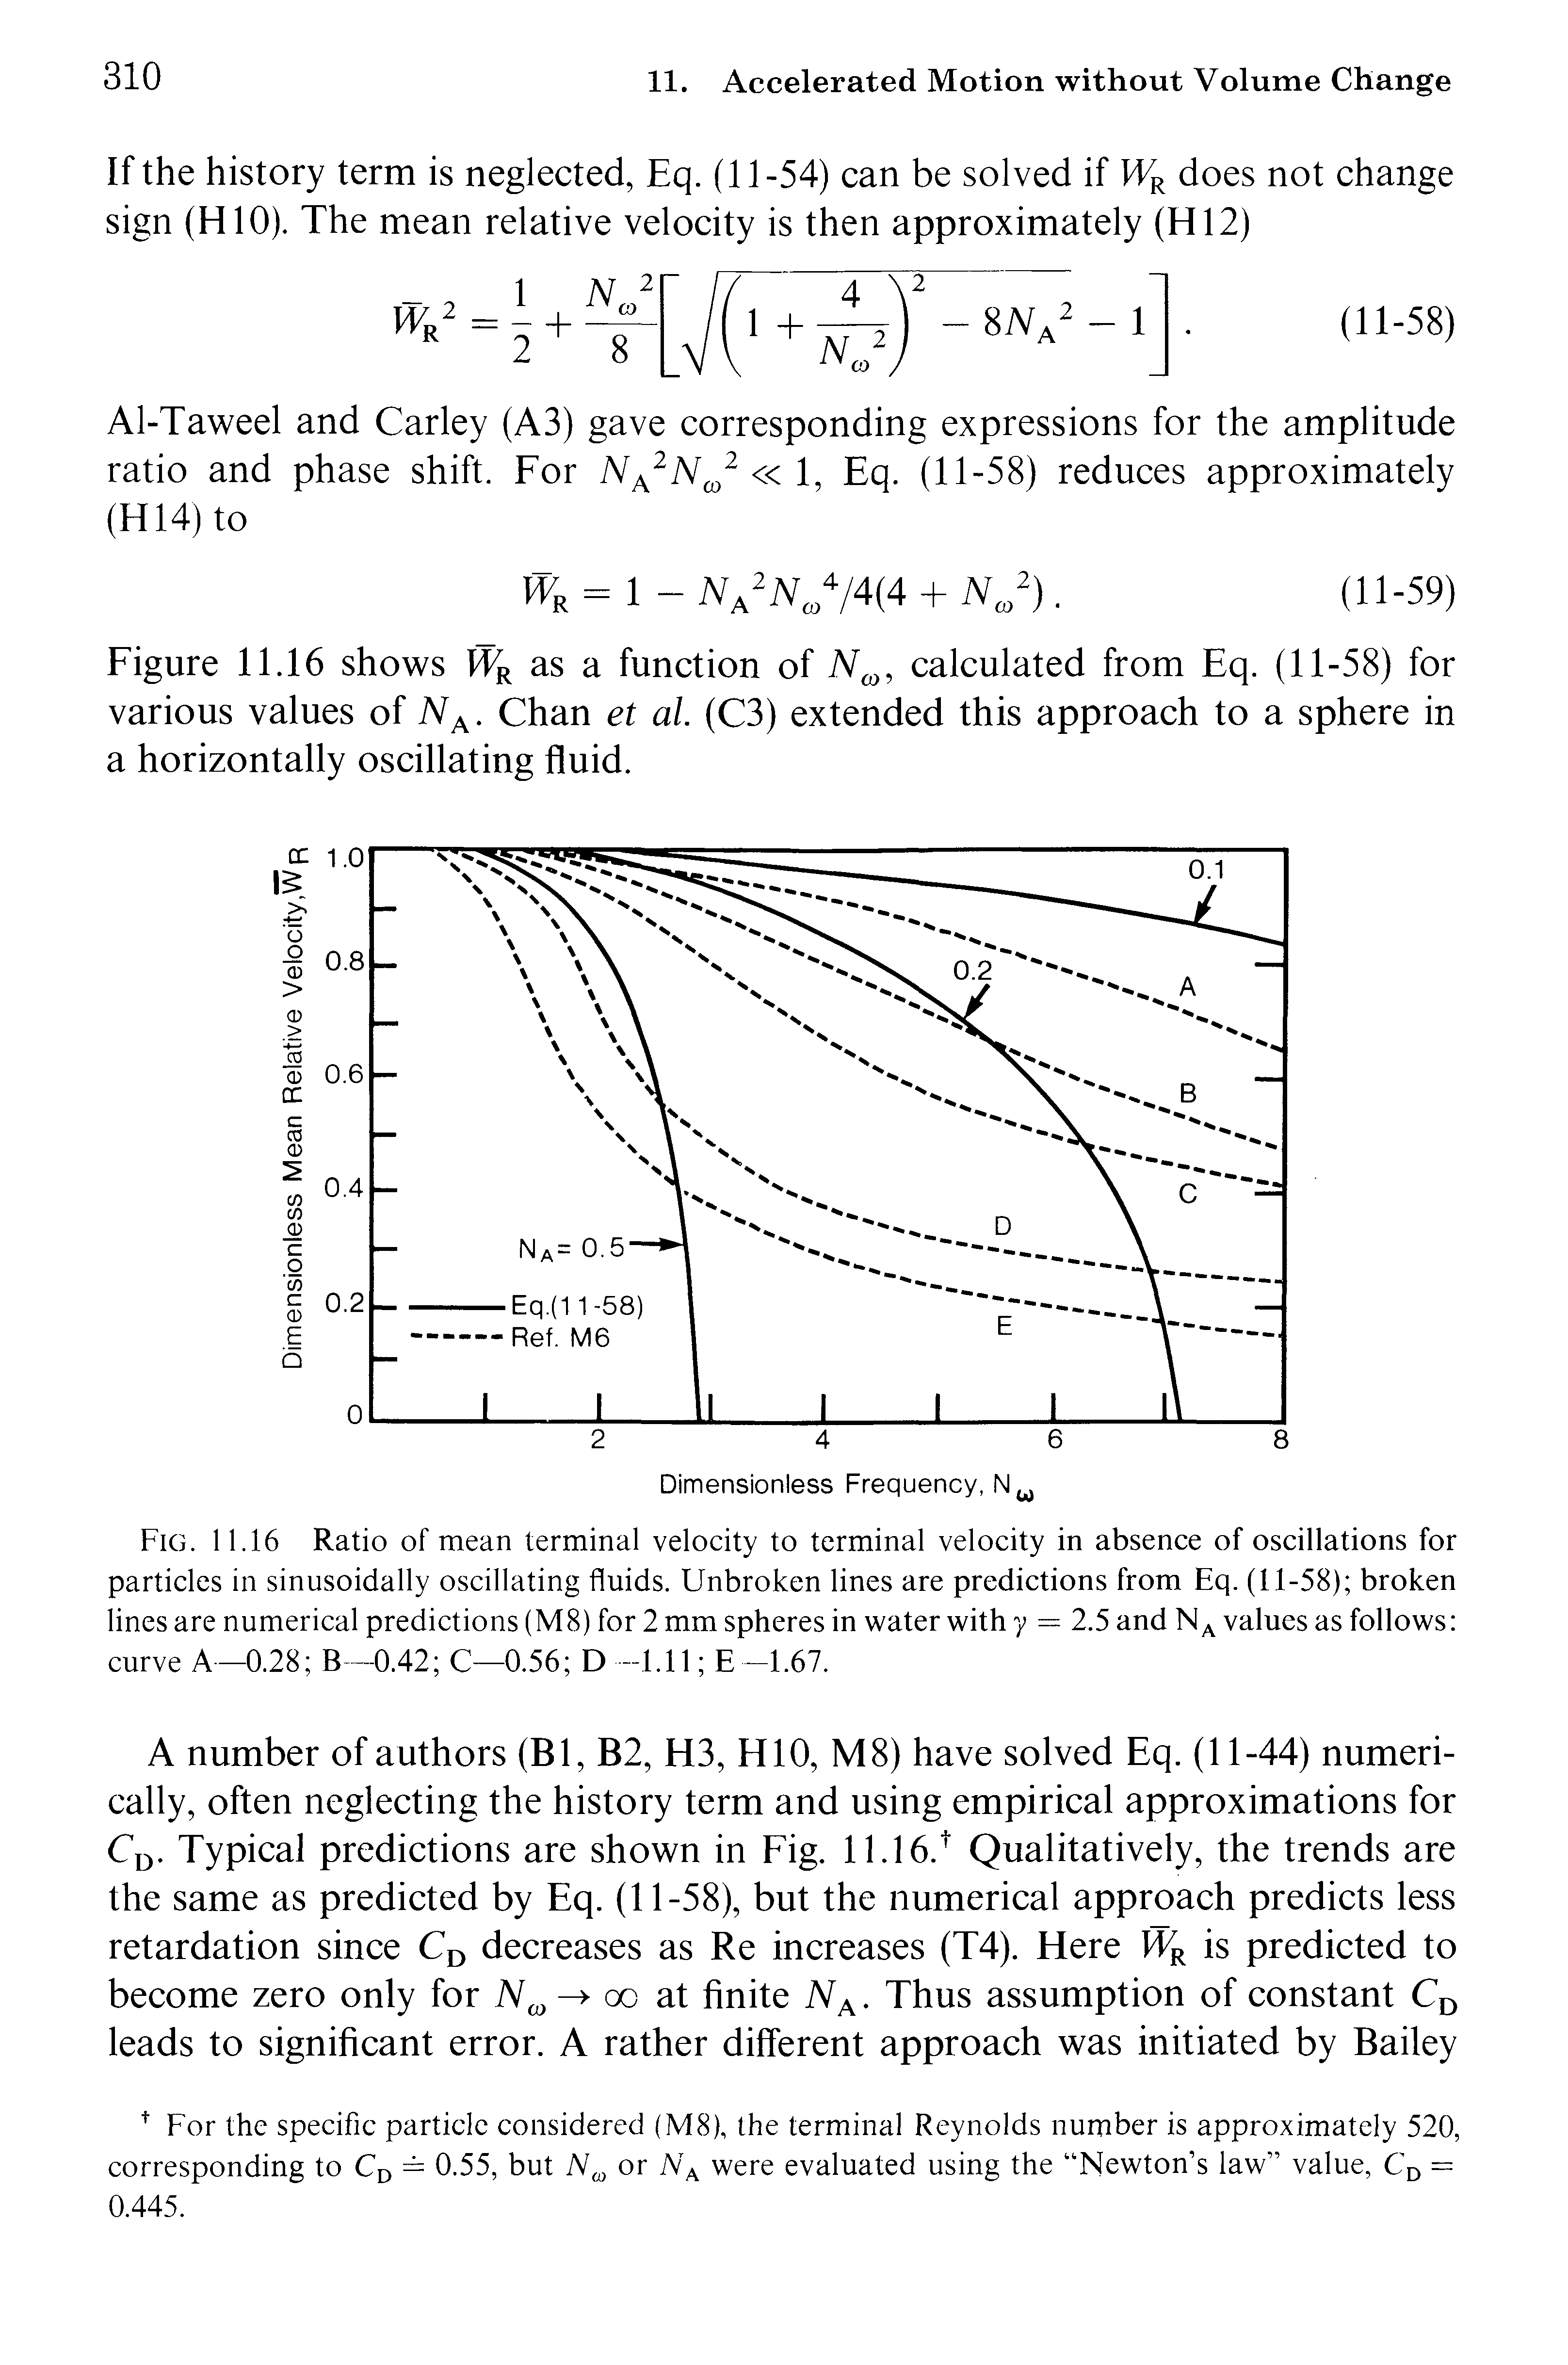 Fig. 11.16 Ratio of mean terminal velocity to terminal velocity in absence of oscillations for particles in sinusoidally oscillating fluids. Unbroken lines are predictions from Eq. (11-58) broken lines are numerical predictions (M8) for 2 mm spheres in water with y = 2.5 and values as follows curve A-0.28 B -0.42 C—0.56 D -1.11 E -1.67.